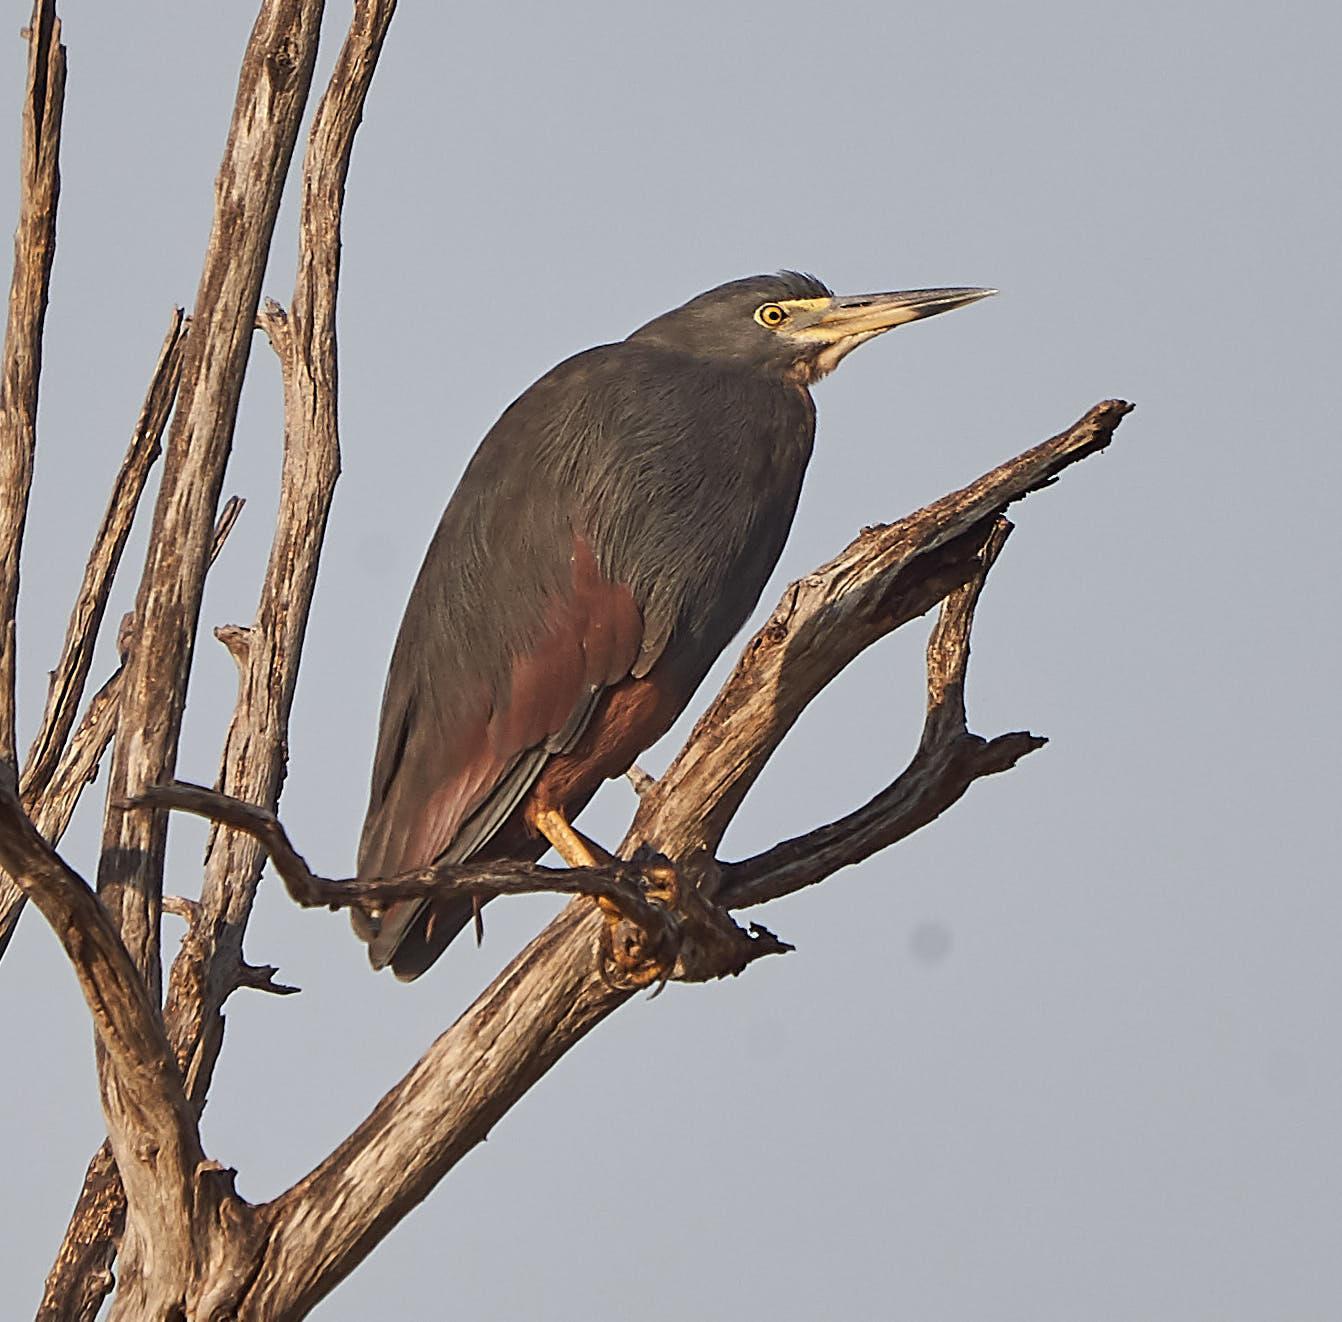 Rufous-bellied Heron Photo by Steven Cheong